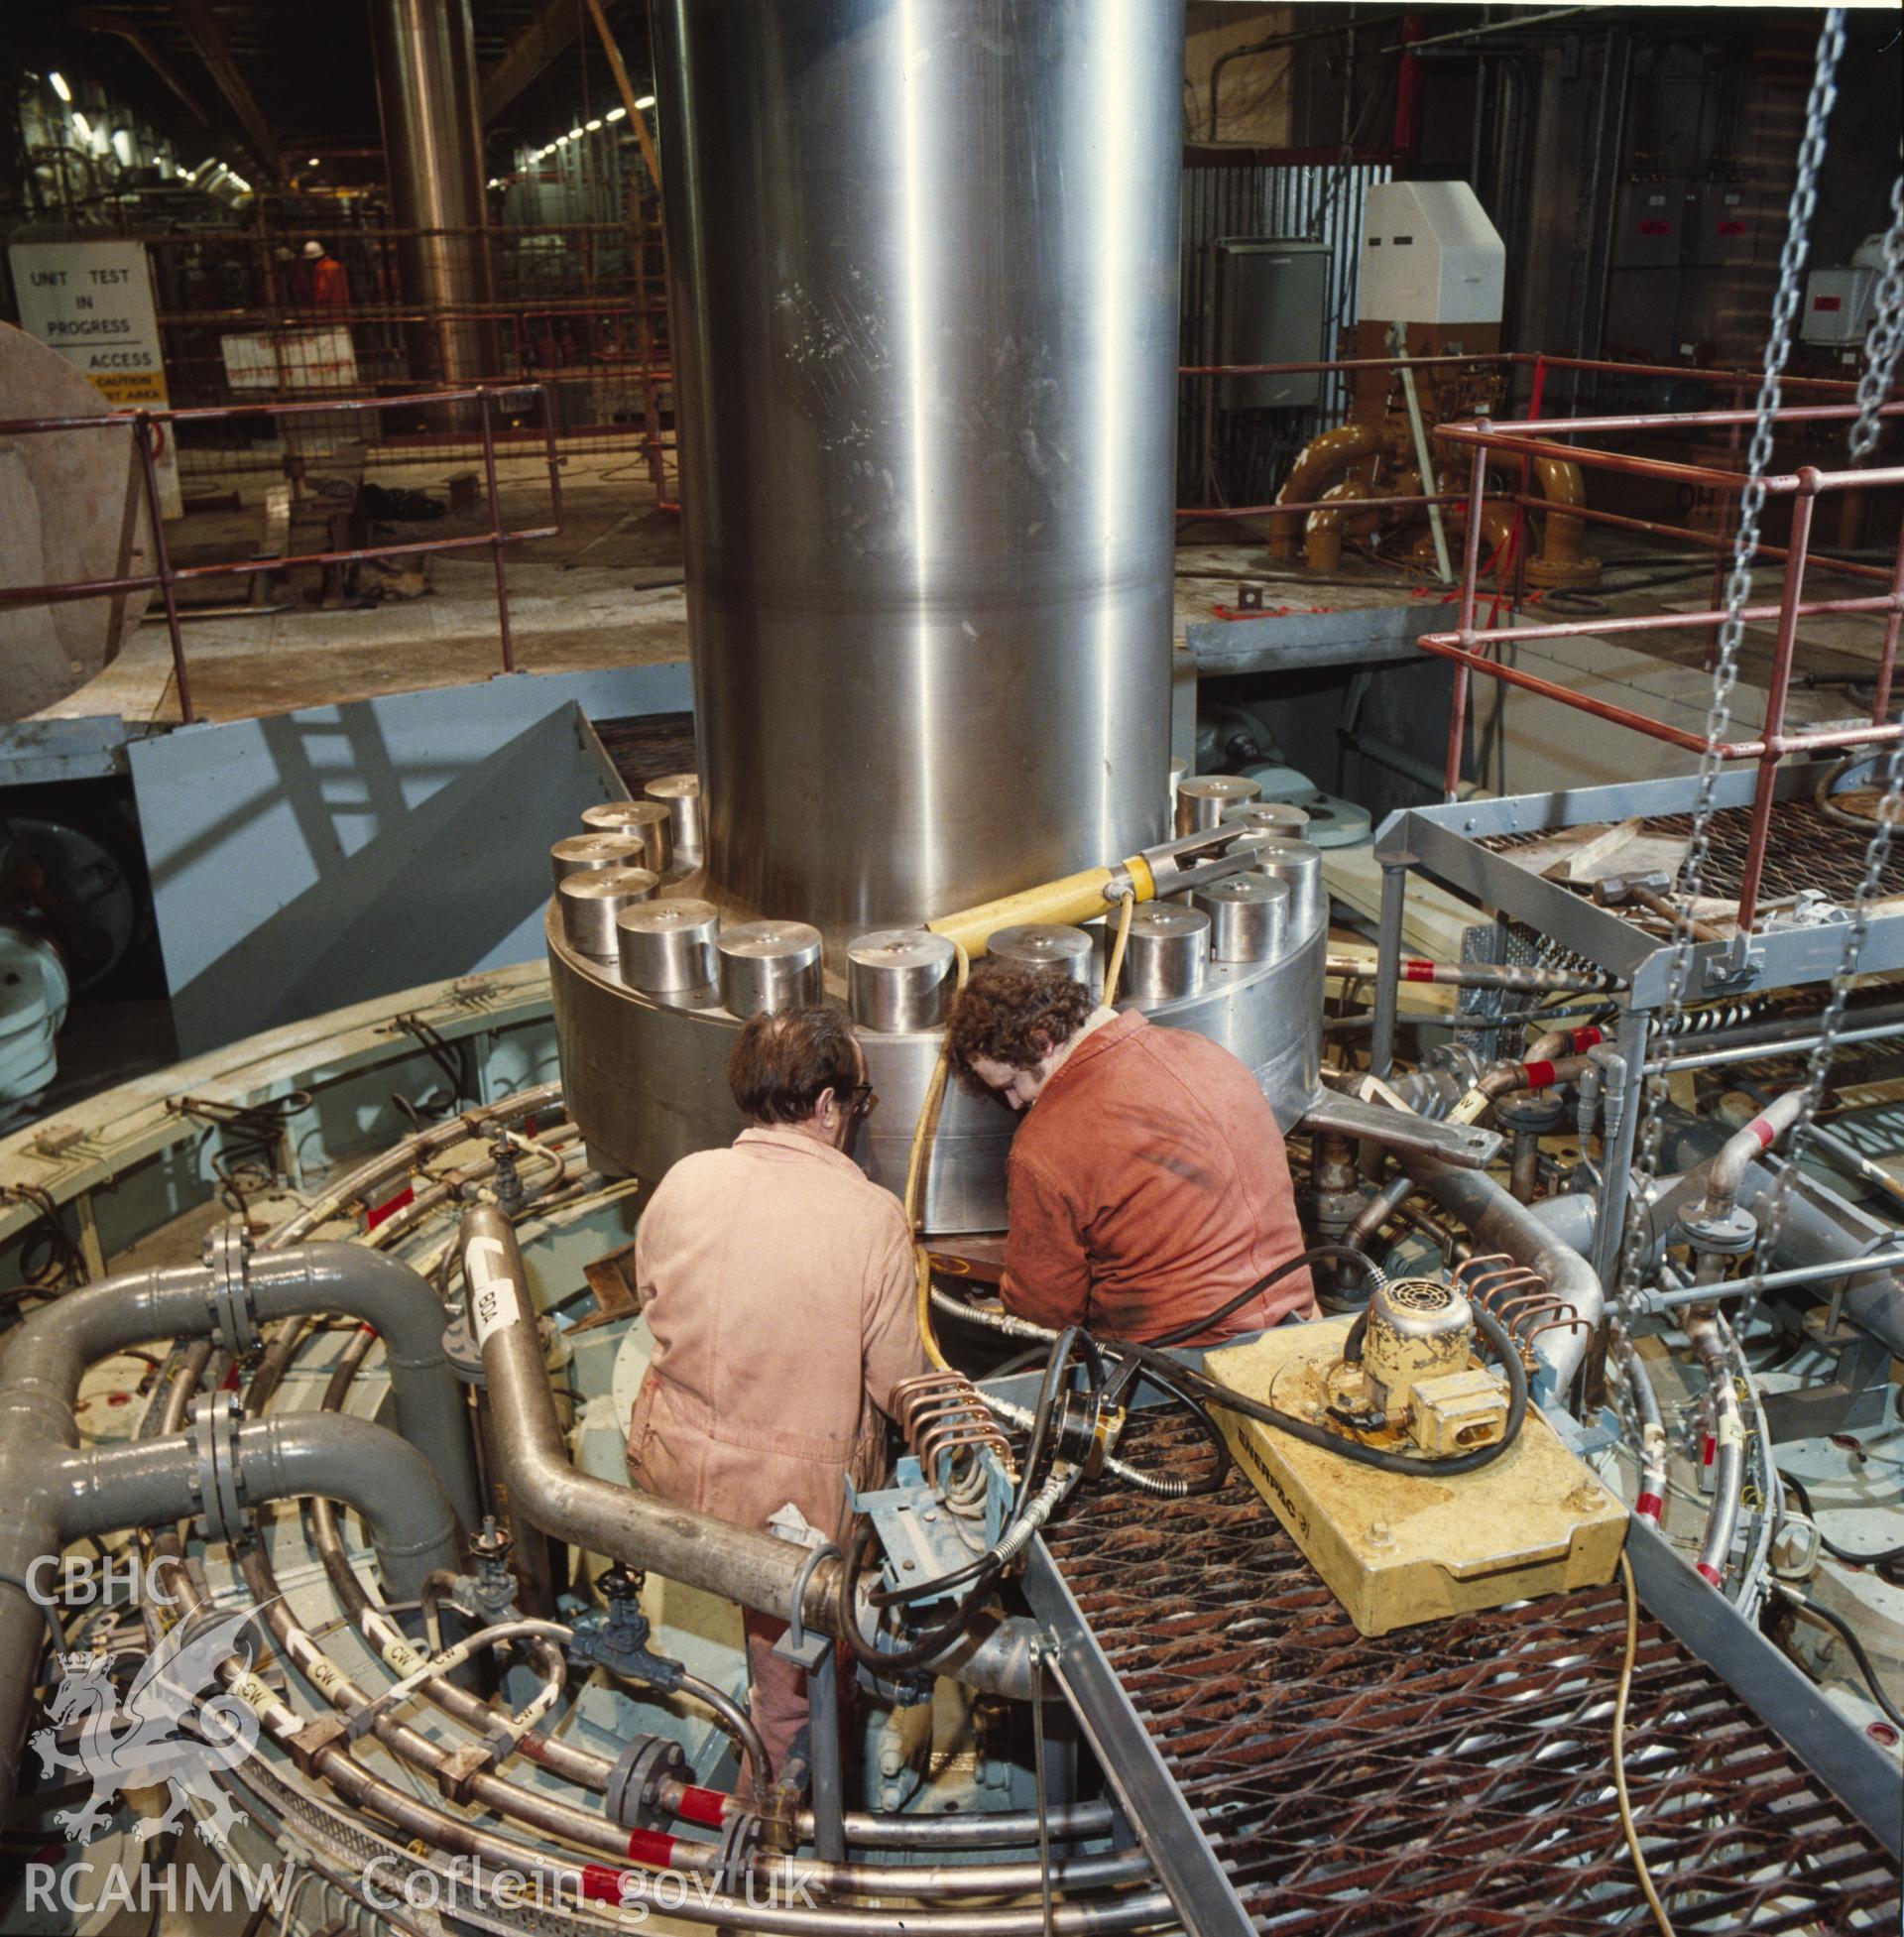 1 colour transparency showing one of the pump turbines under construction at Dinorwig Power Station; collated by the former Central Office of Information.